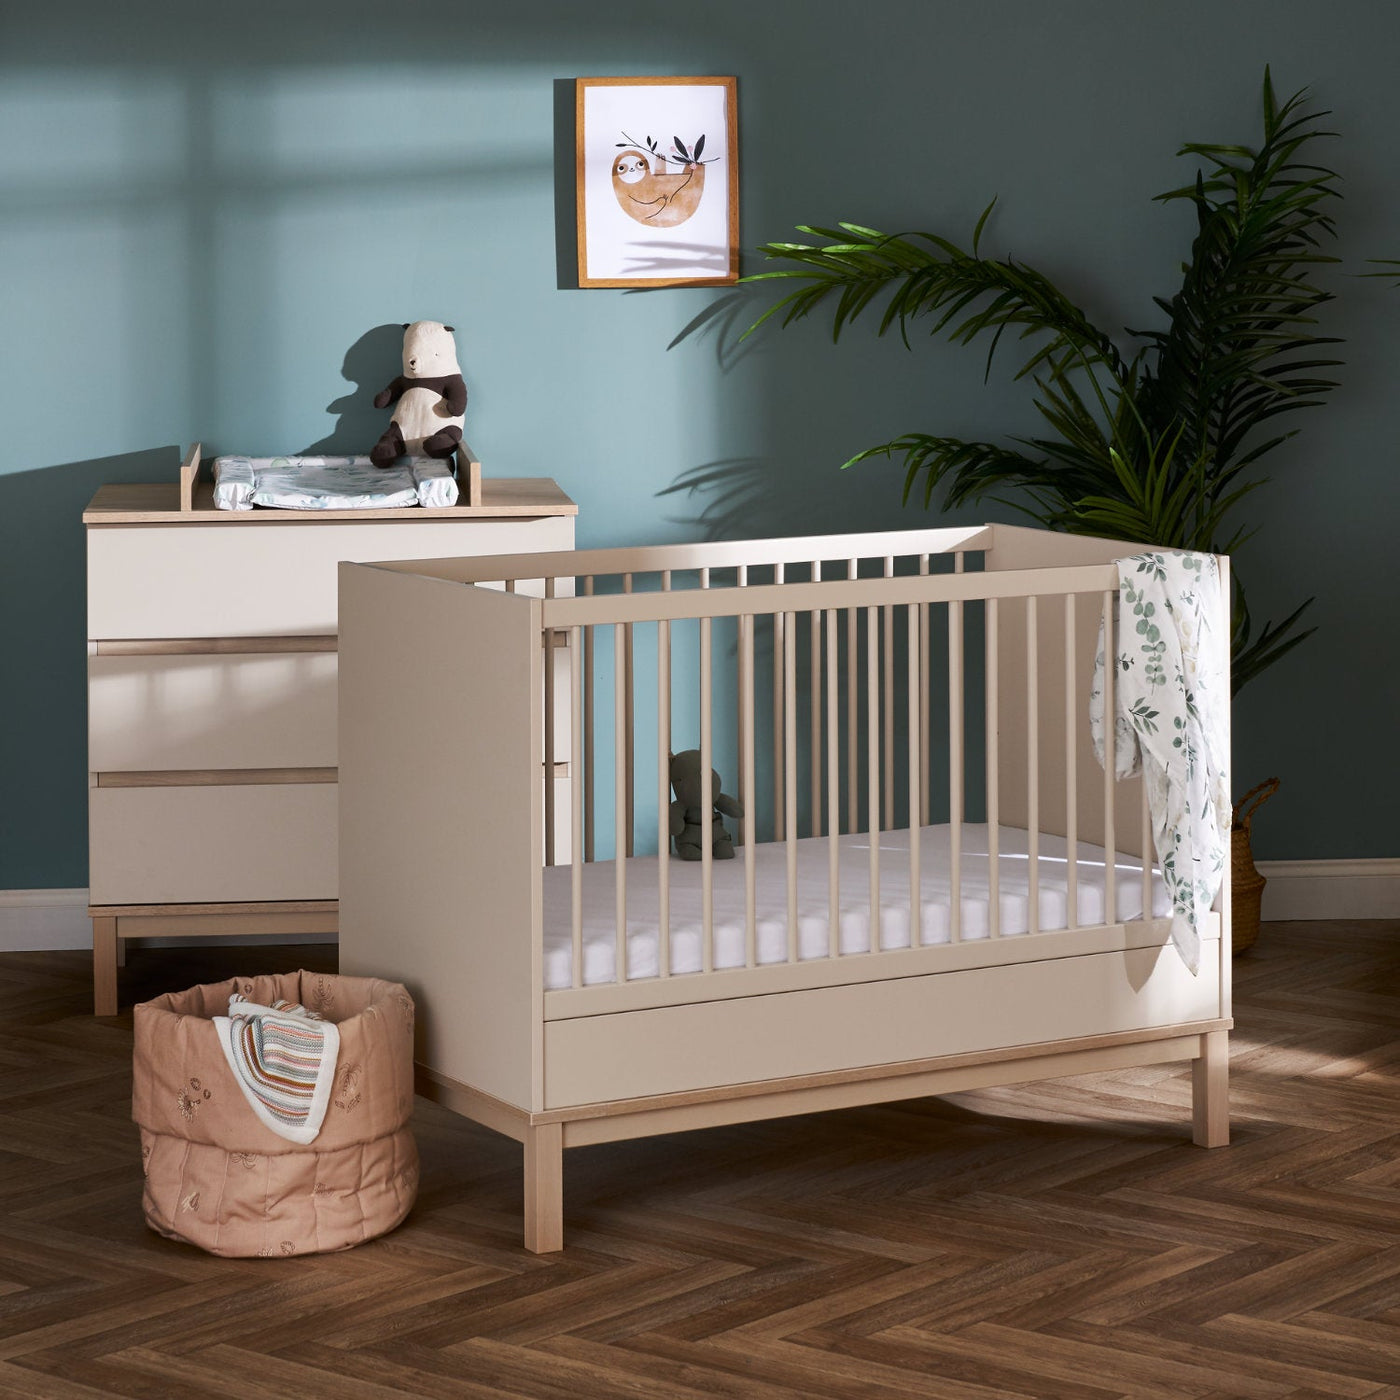 Astrid Mini Cot Bed - Satin-Cots & Cot Beds-OBABY-Yes Bebe